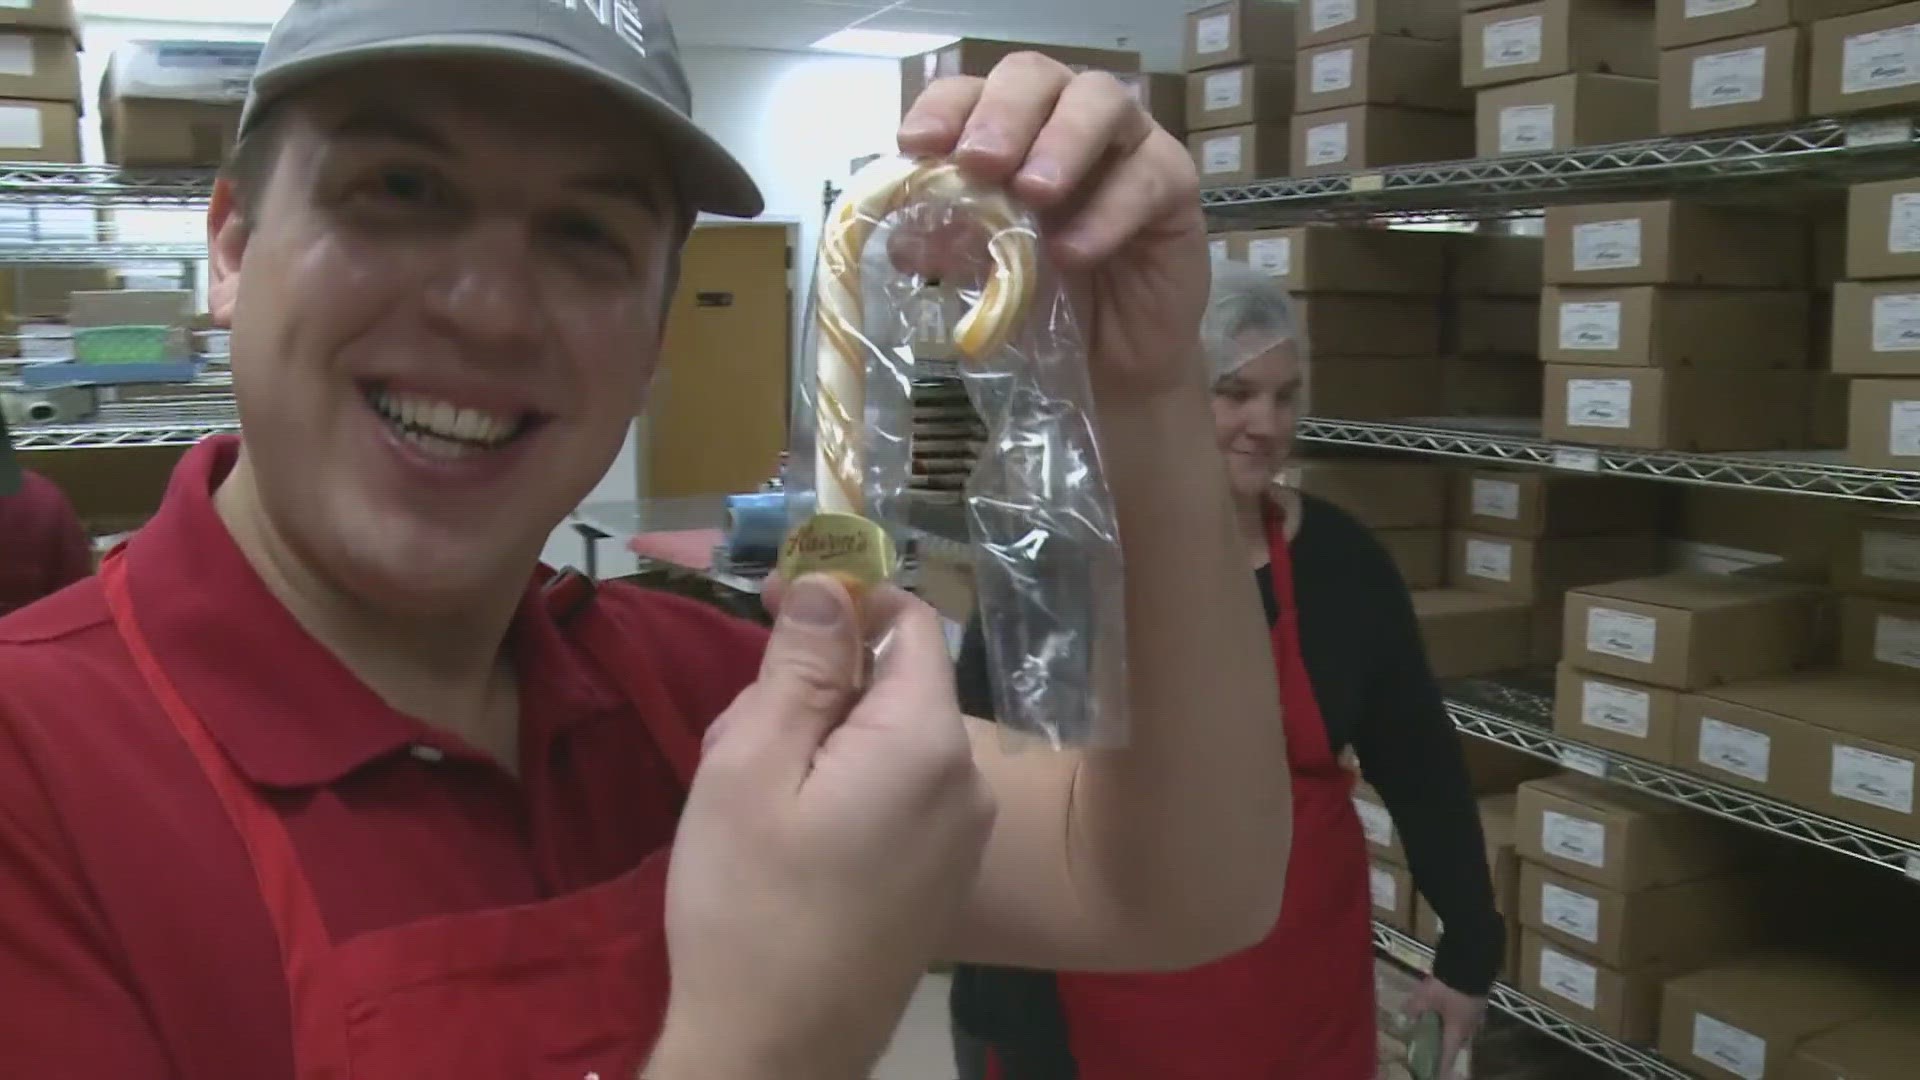 Here's how it went with the folks at Haven's Candies in southern Maine.